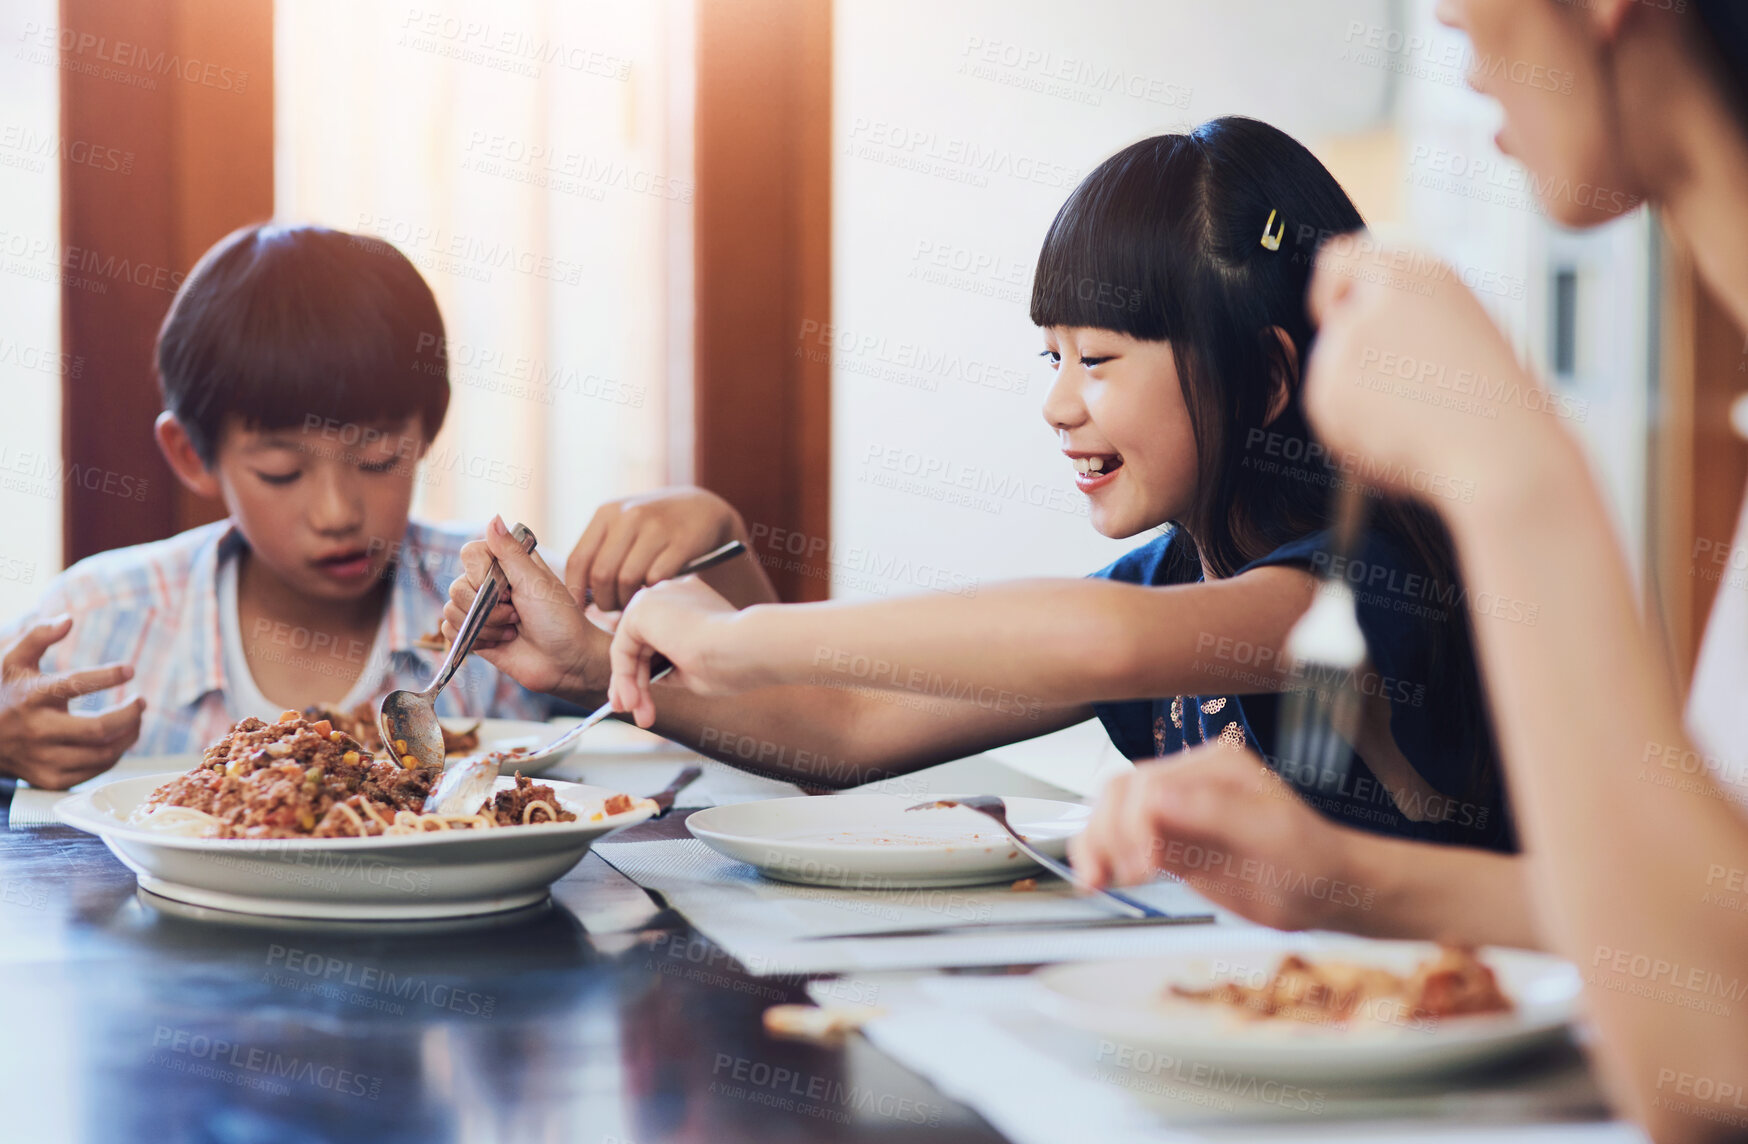 Buy stock photo Shot of two little children enjoying a meal with their mother at home